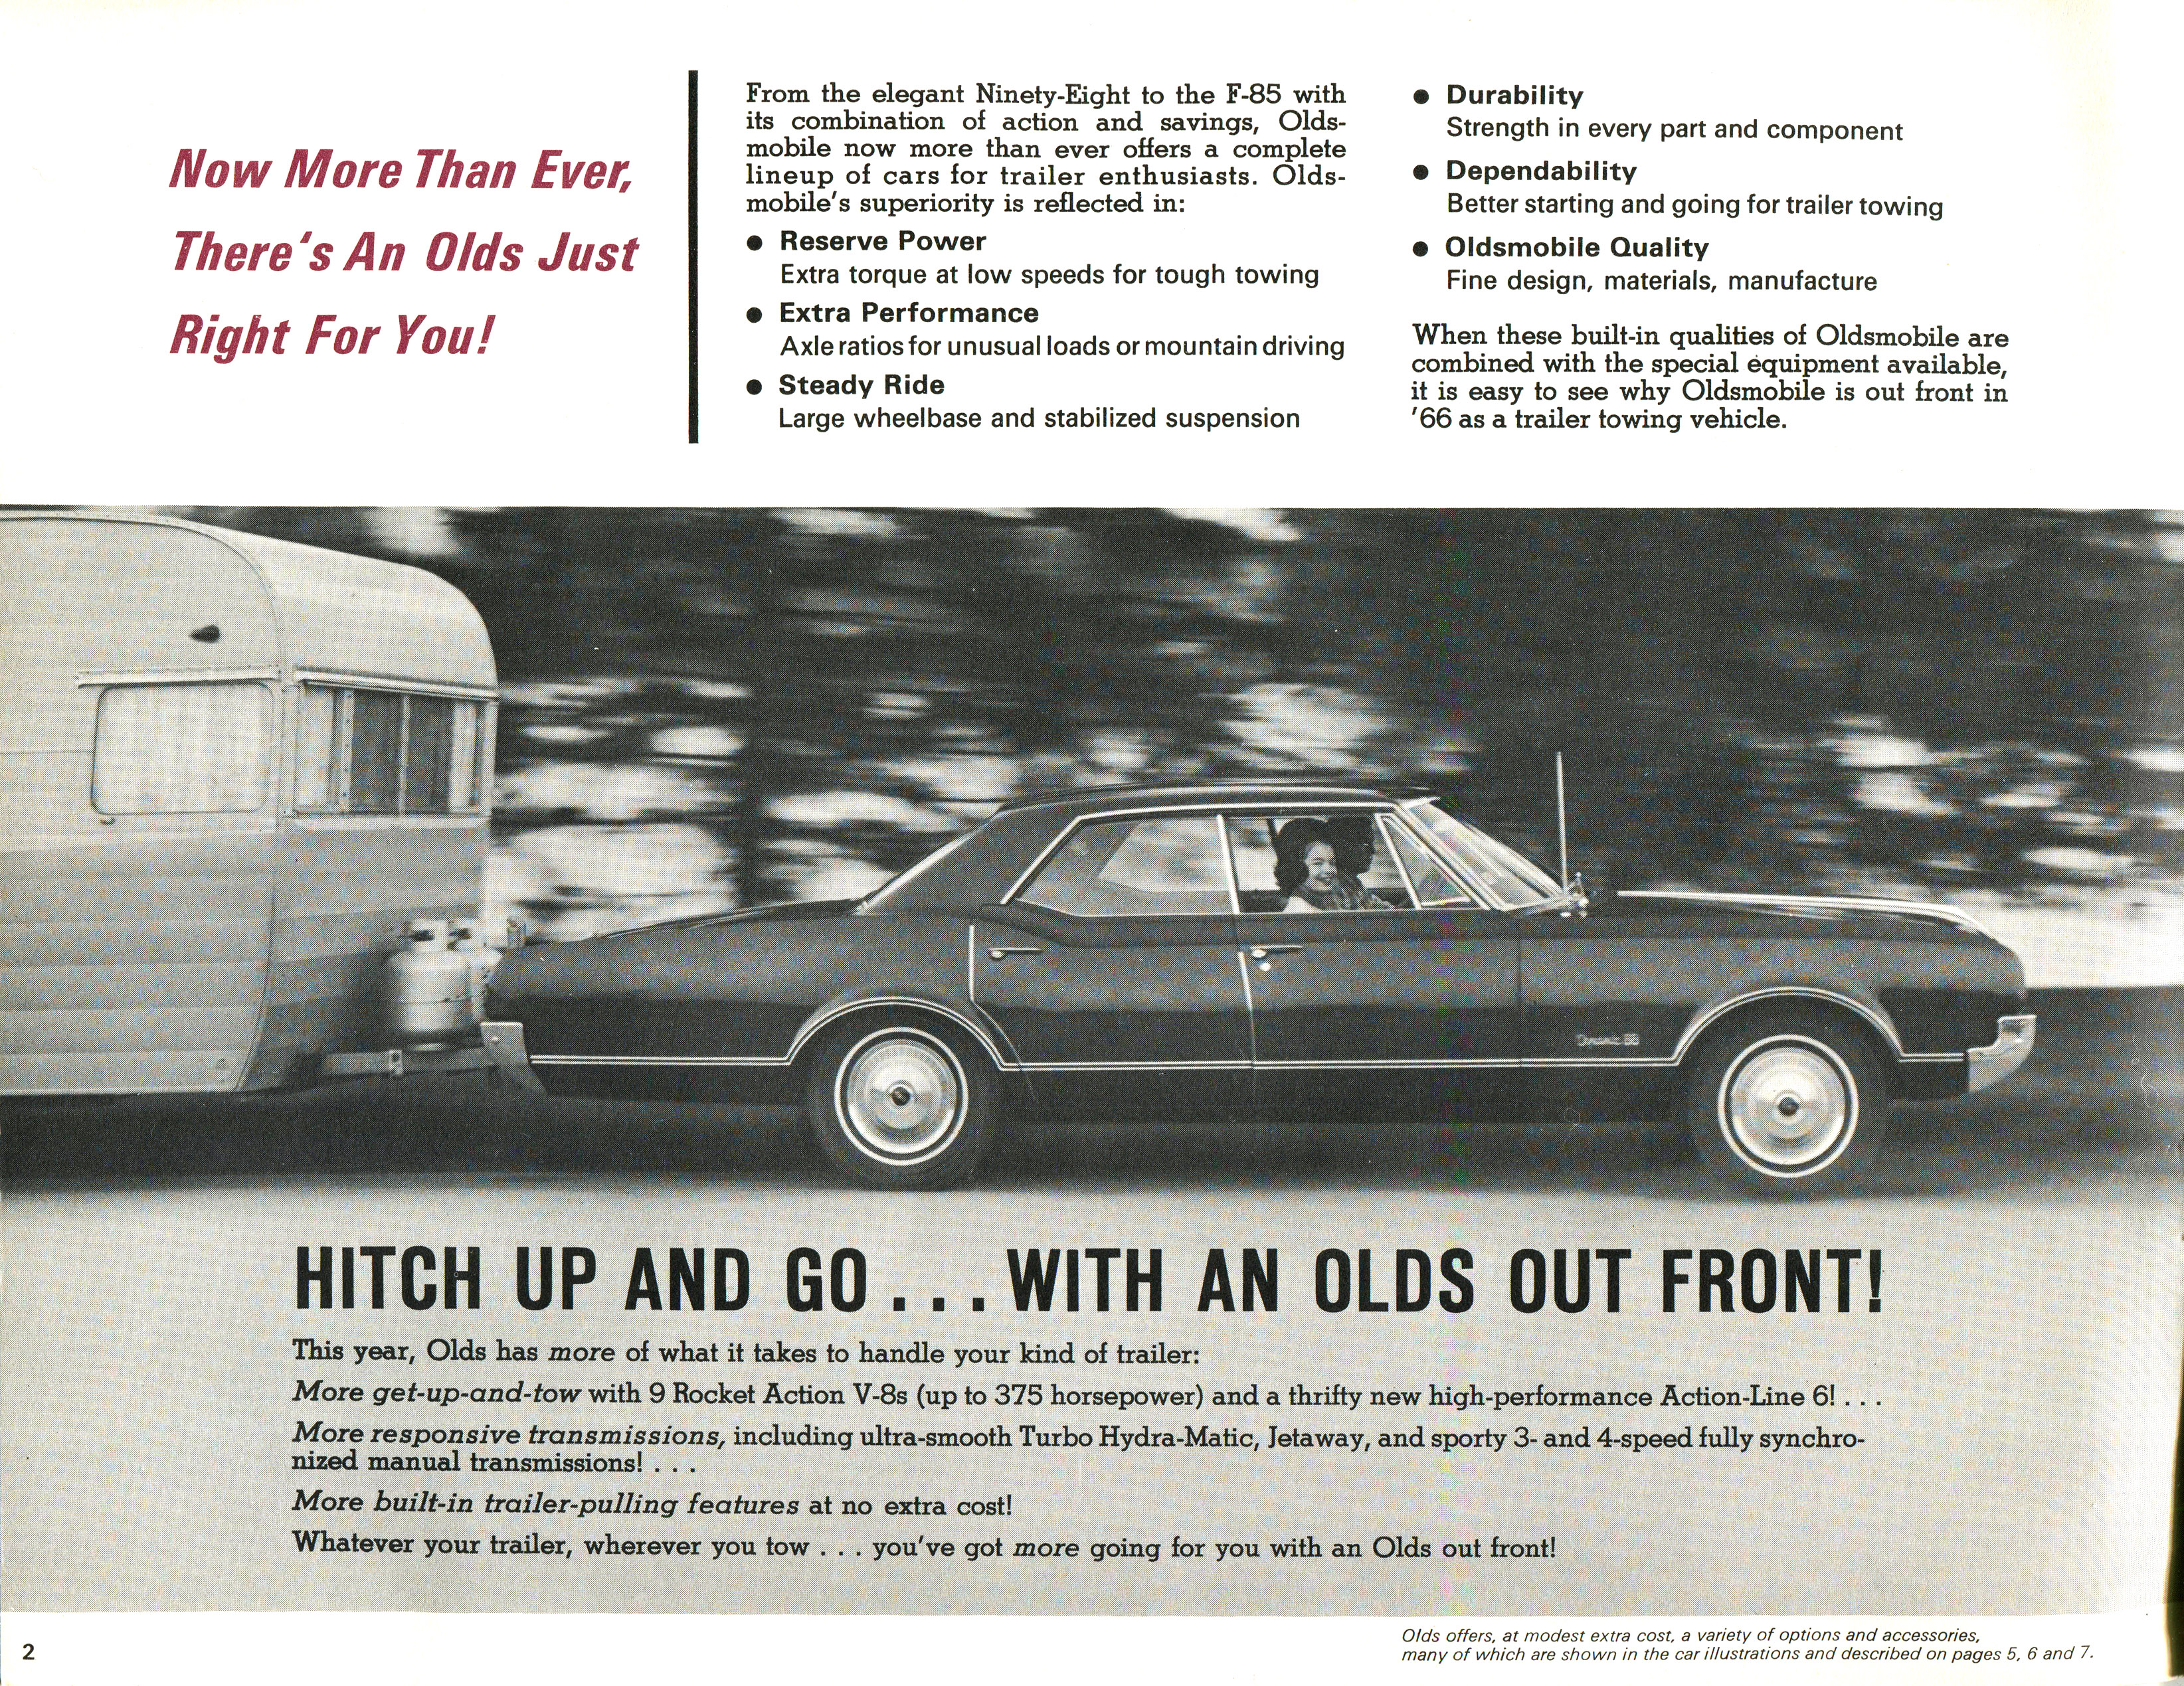 1966_OLDSMOBILE_Trailering_Guide_Page_02